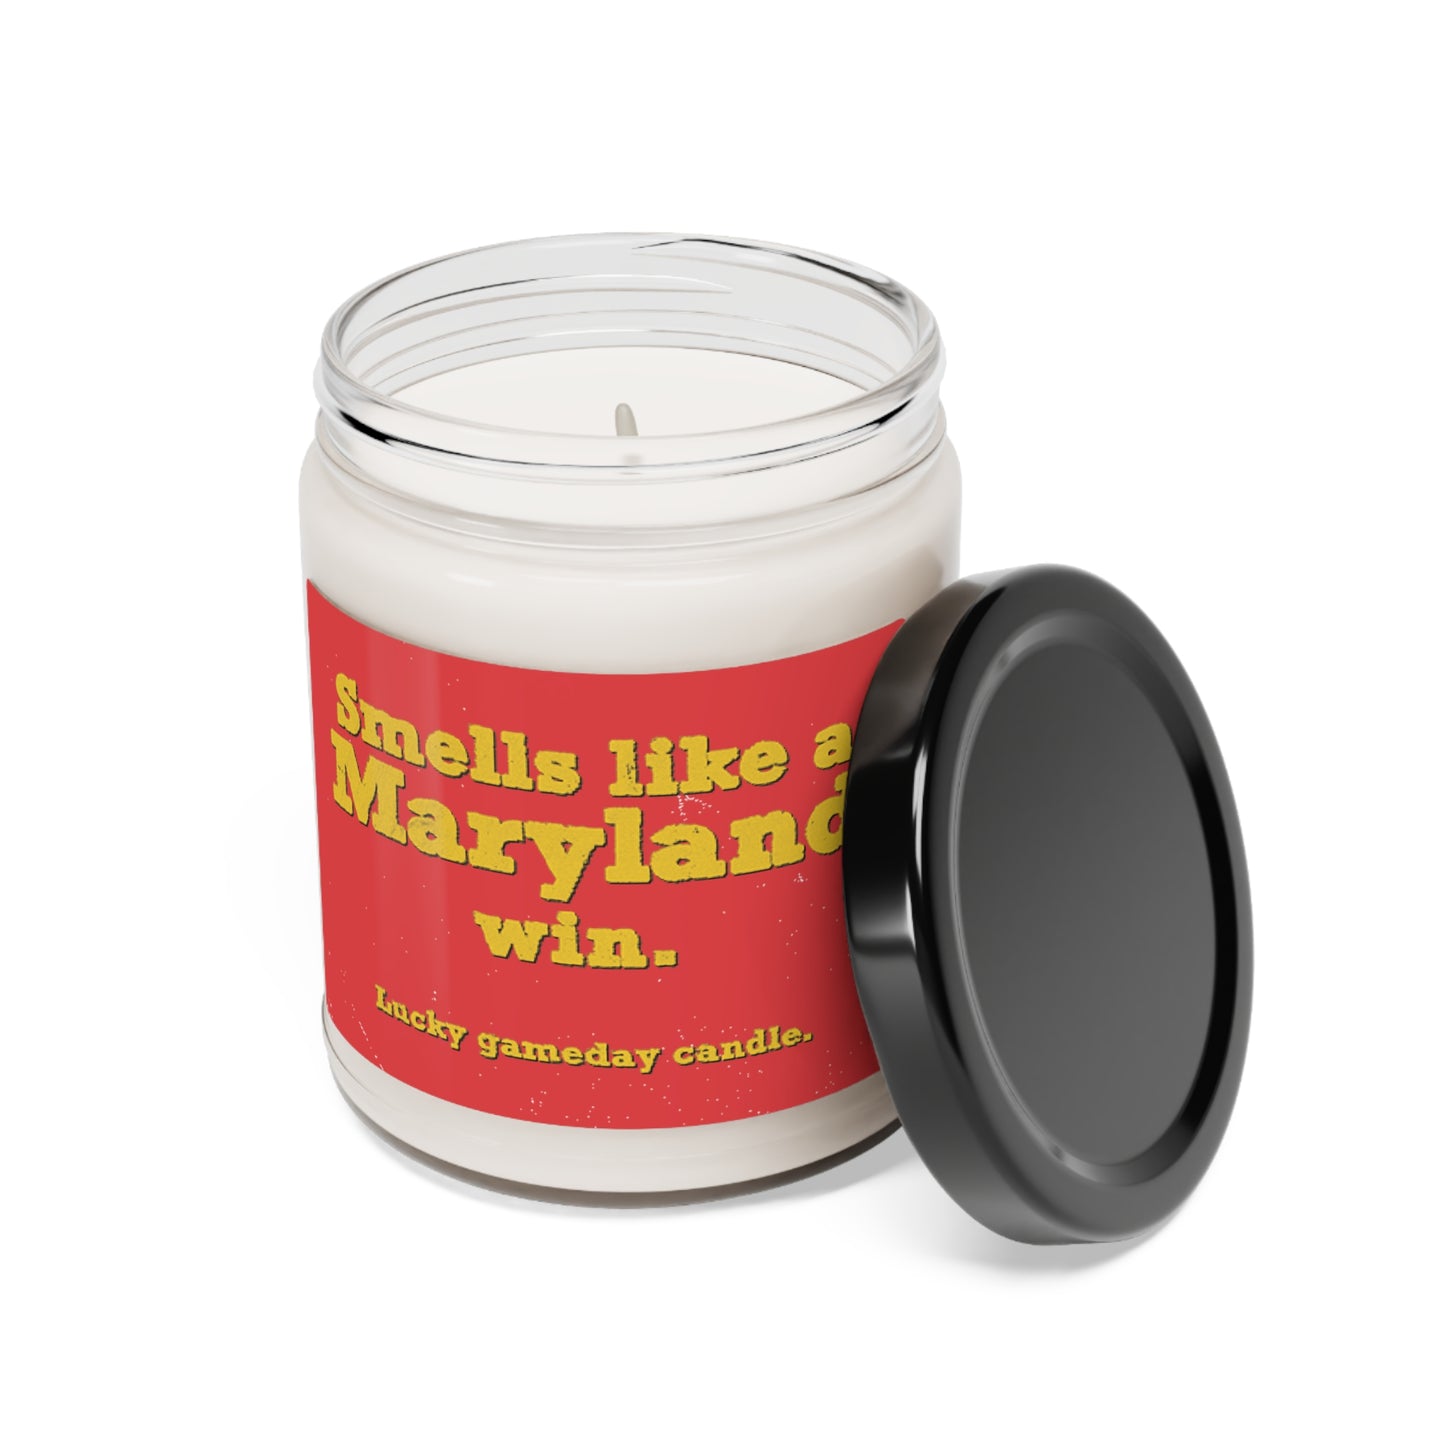 Maryland - "Smells Like a Maryland Win" scented candle